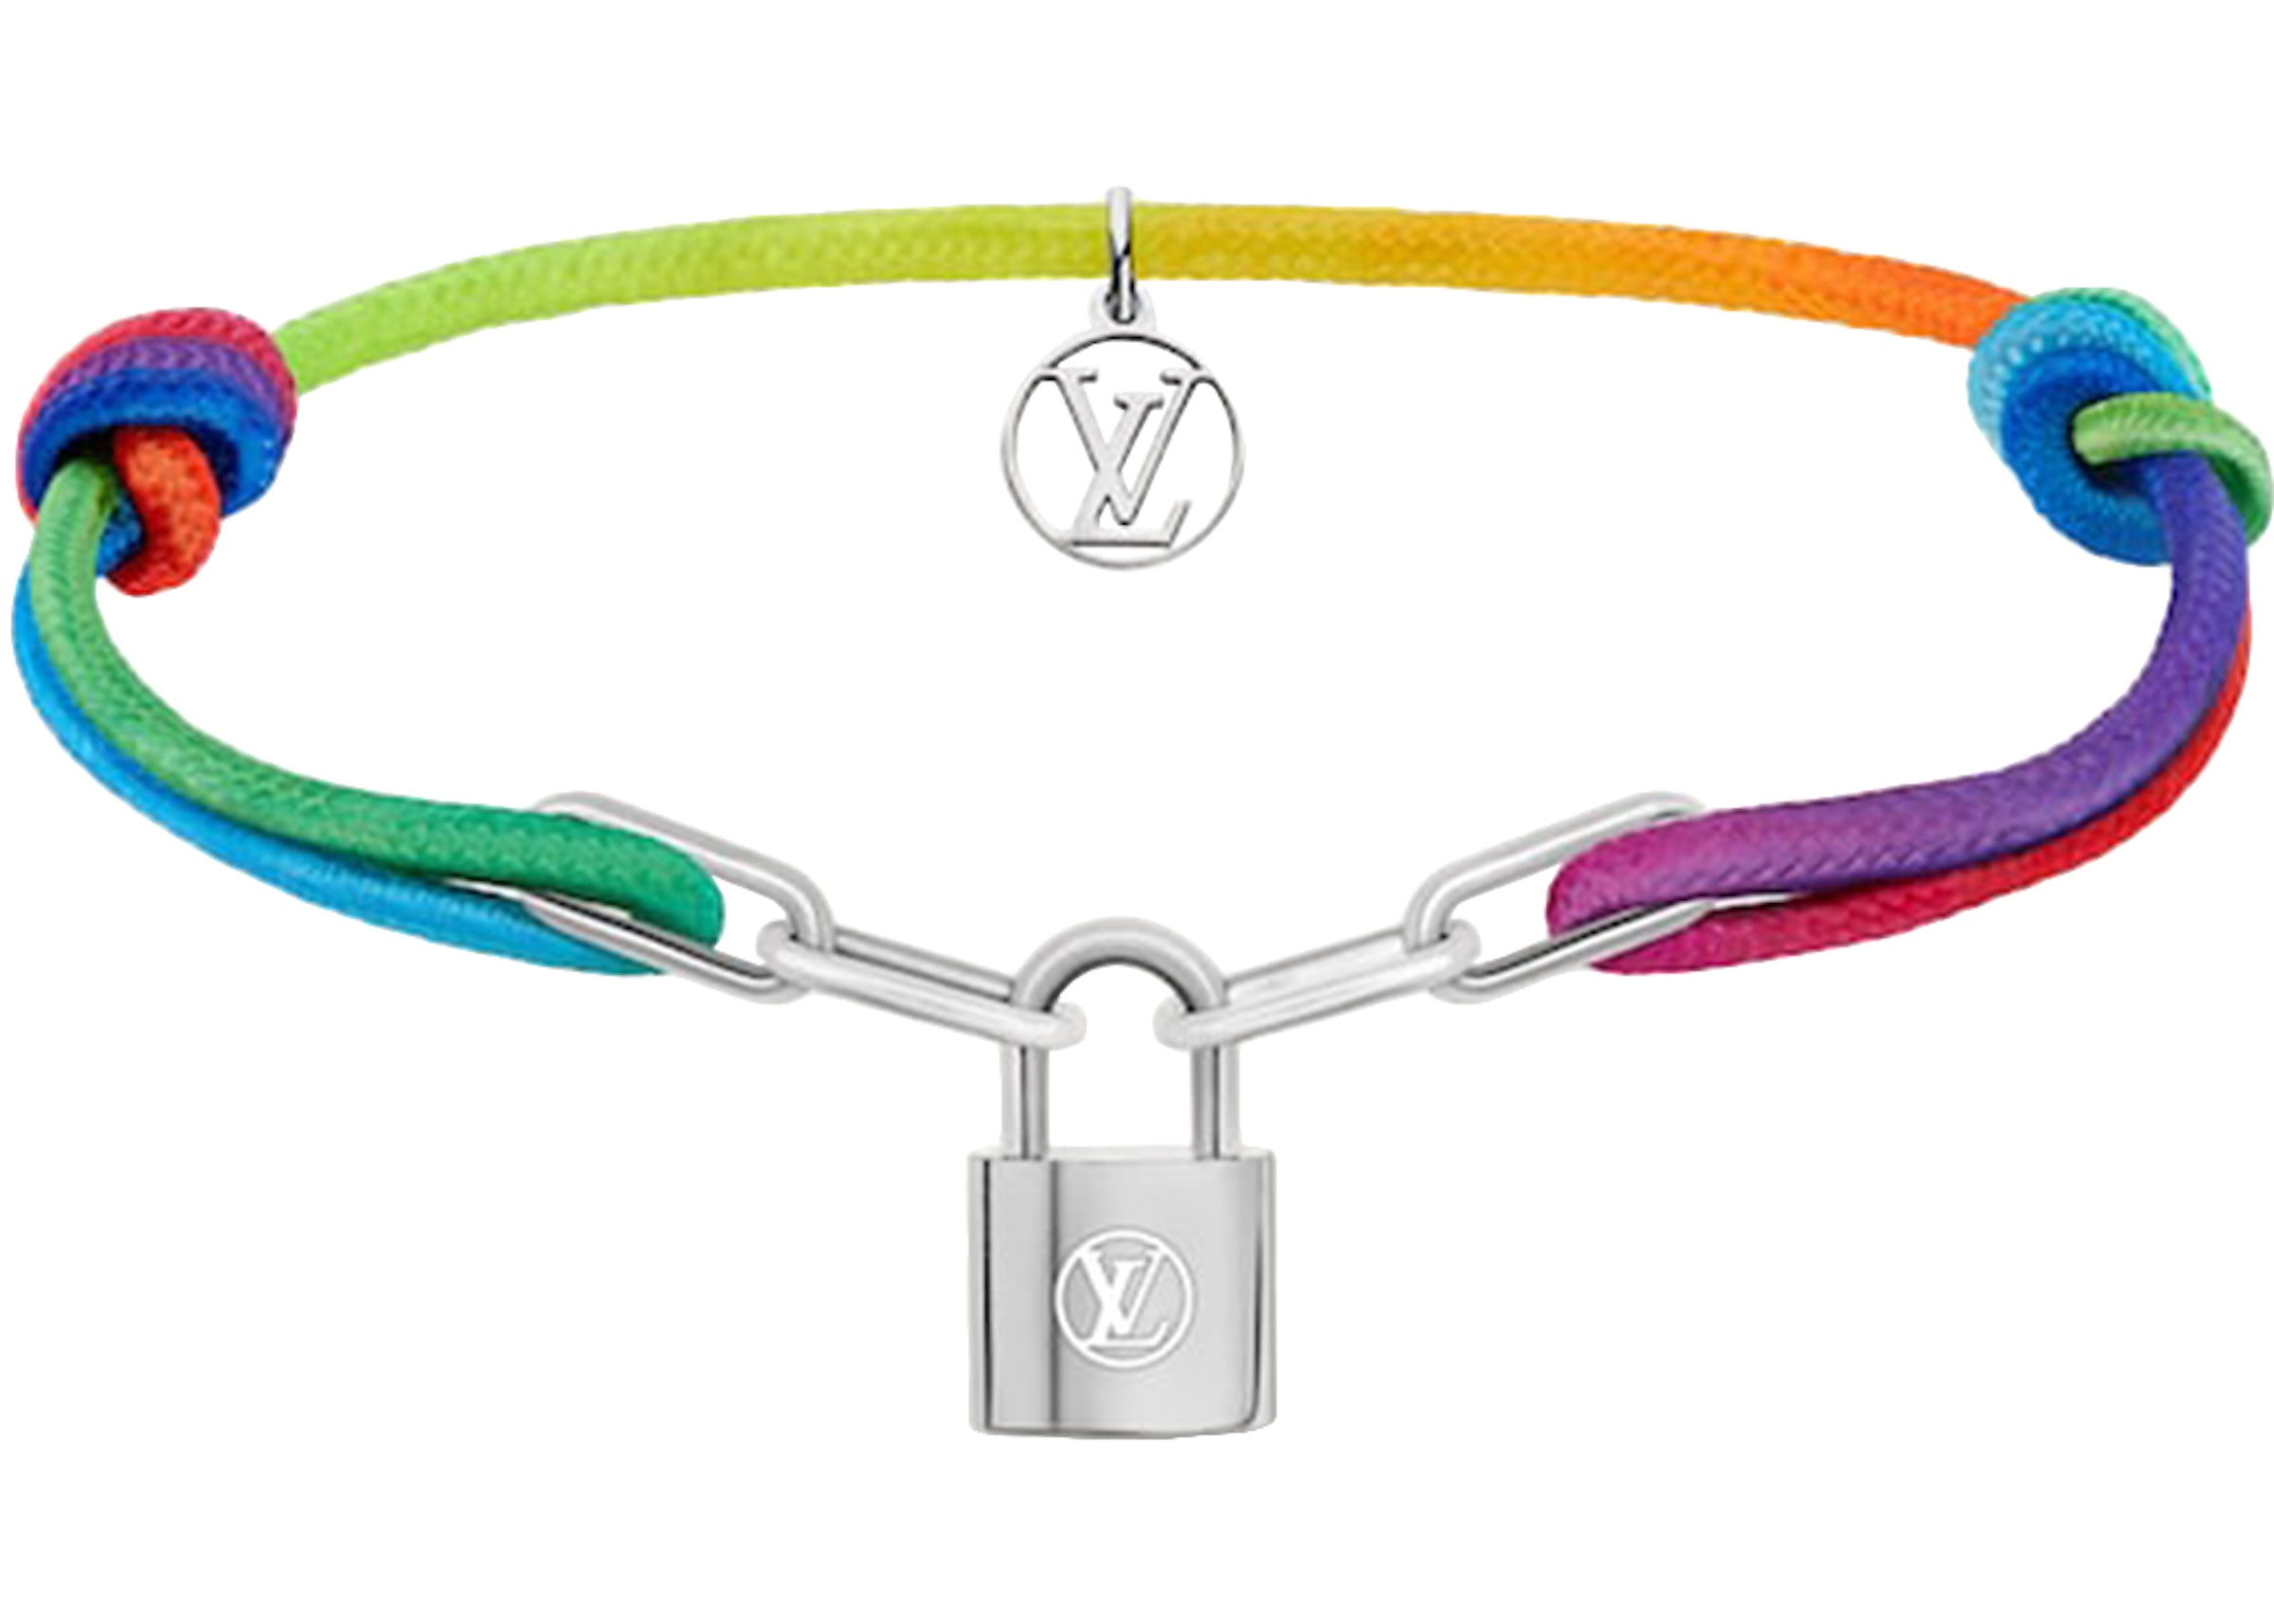 Louis Vuitton x Virgil Abloh Silver Lockit Bracelet Black in Natural  Titanium/Recycled Polyester with Silver-tone - US